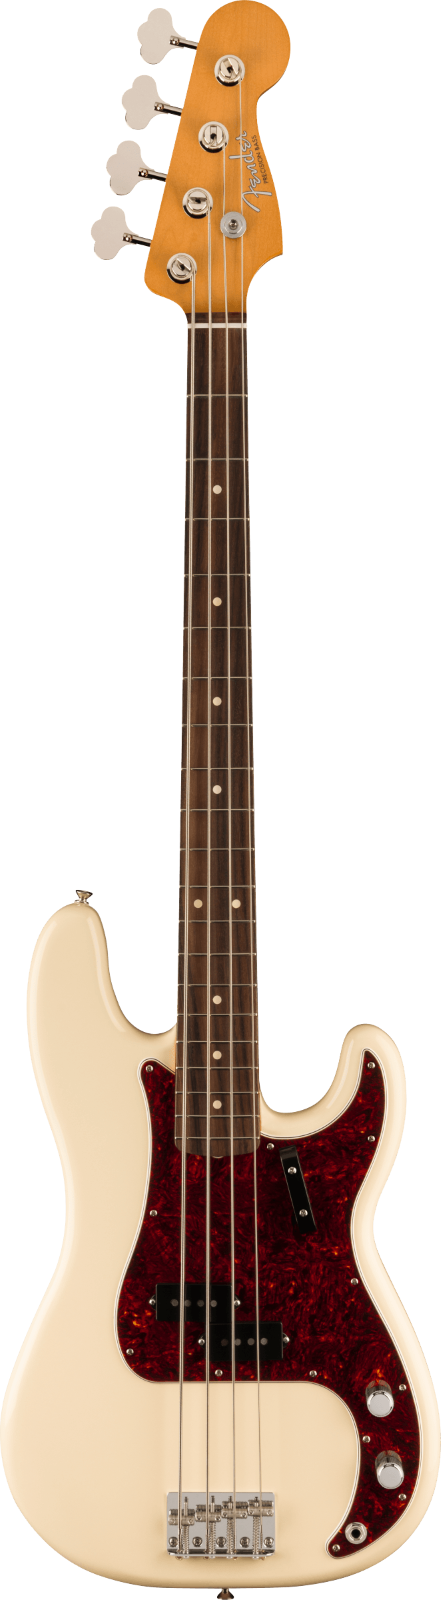 Fender Vintera II 60s Precision Bass, Rosewood Fingerboard, Olympic White : photo 1